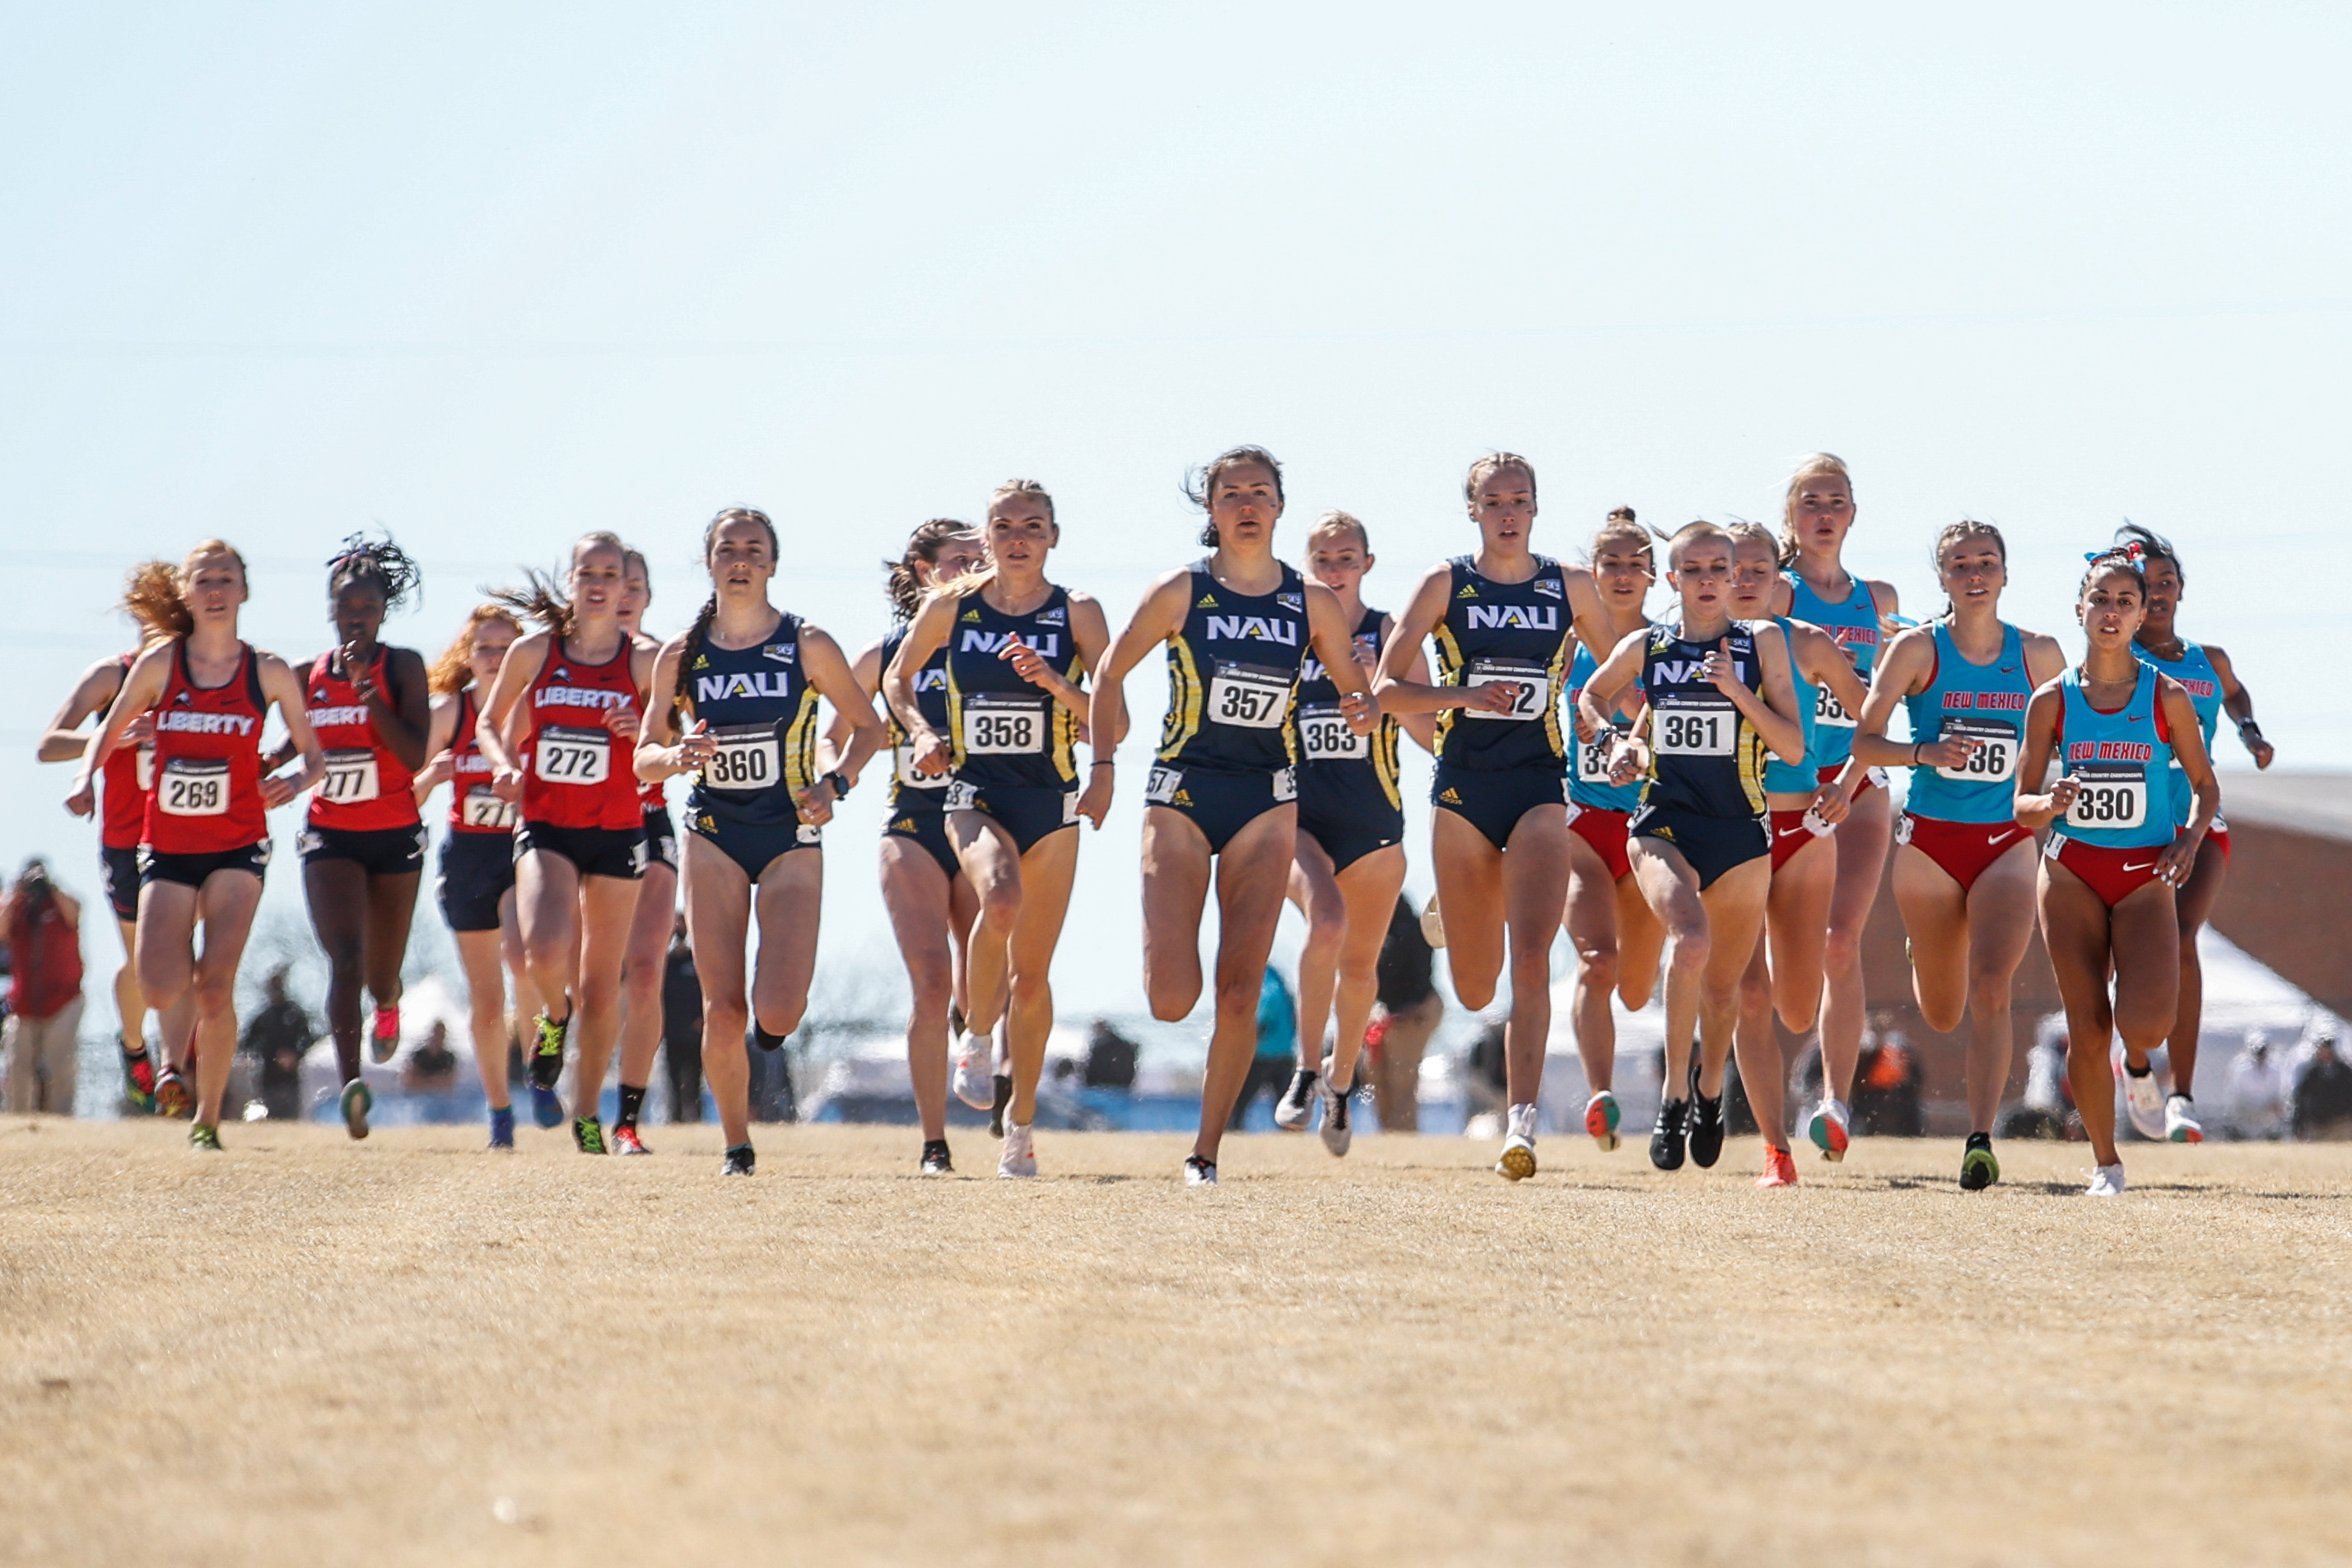 Women’s Cross Country Team Makes NCAA Nationals Debut At Stillwater